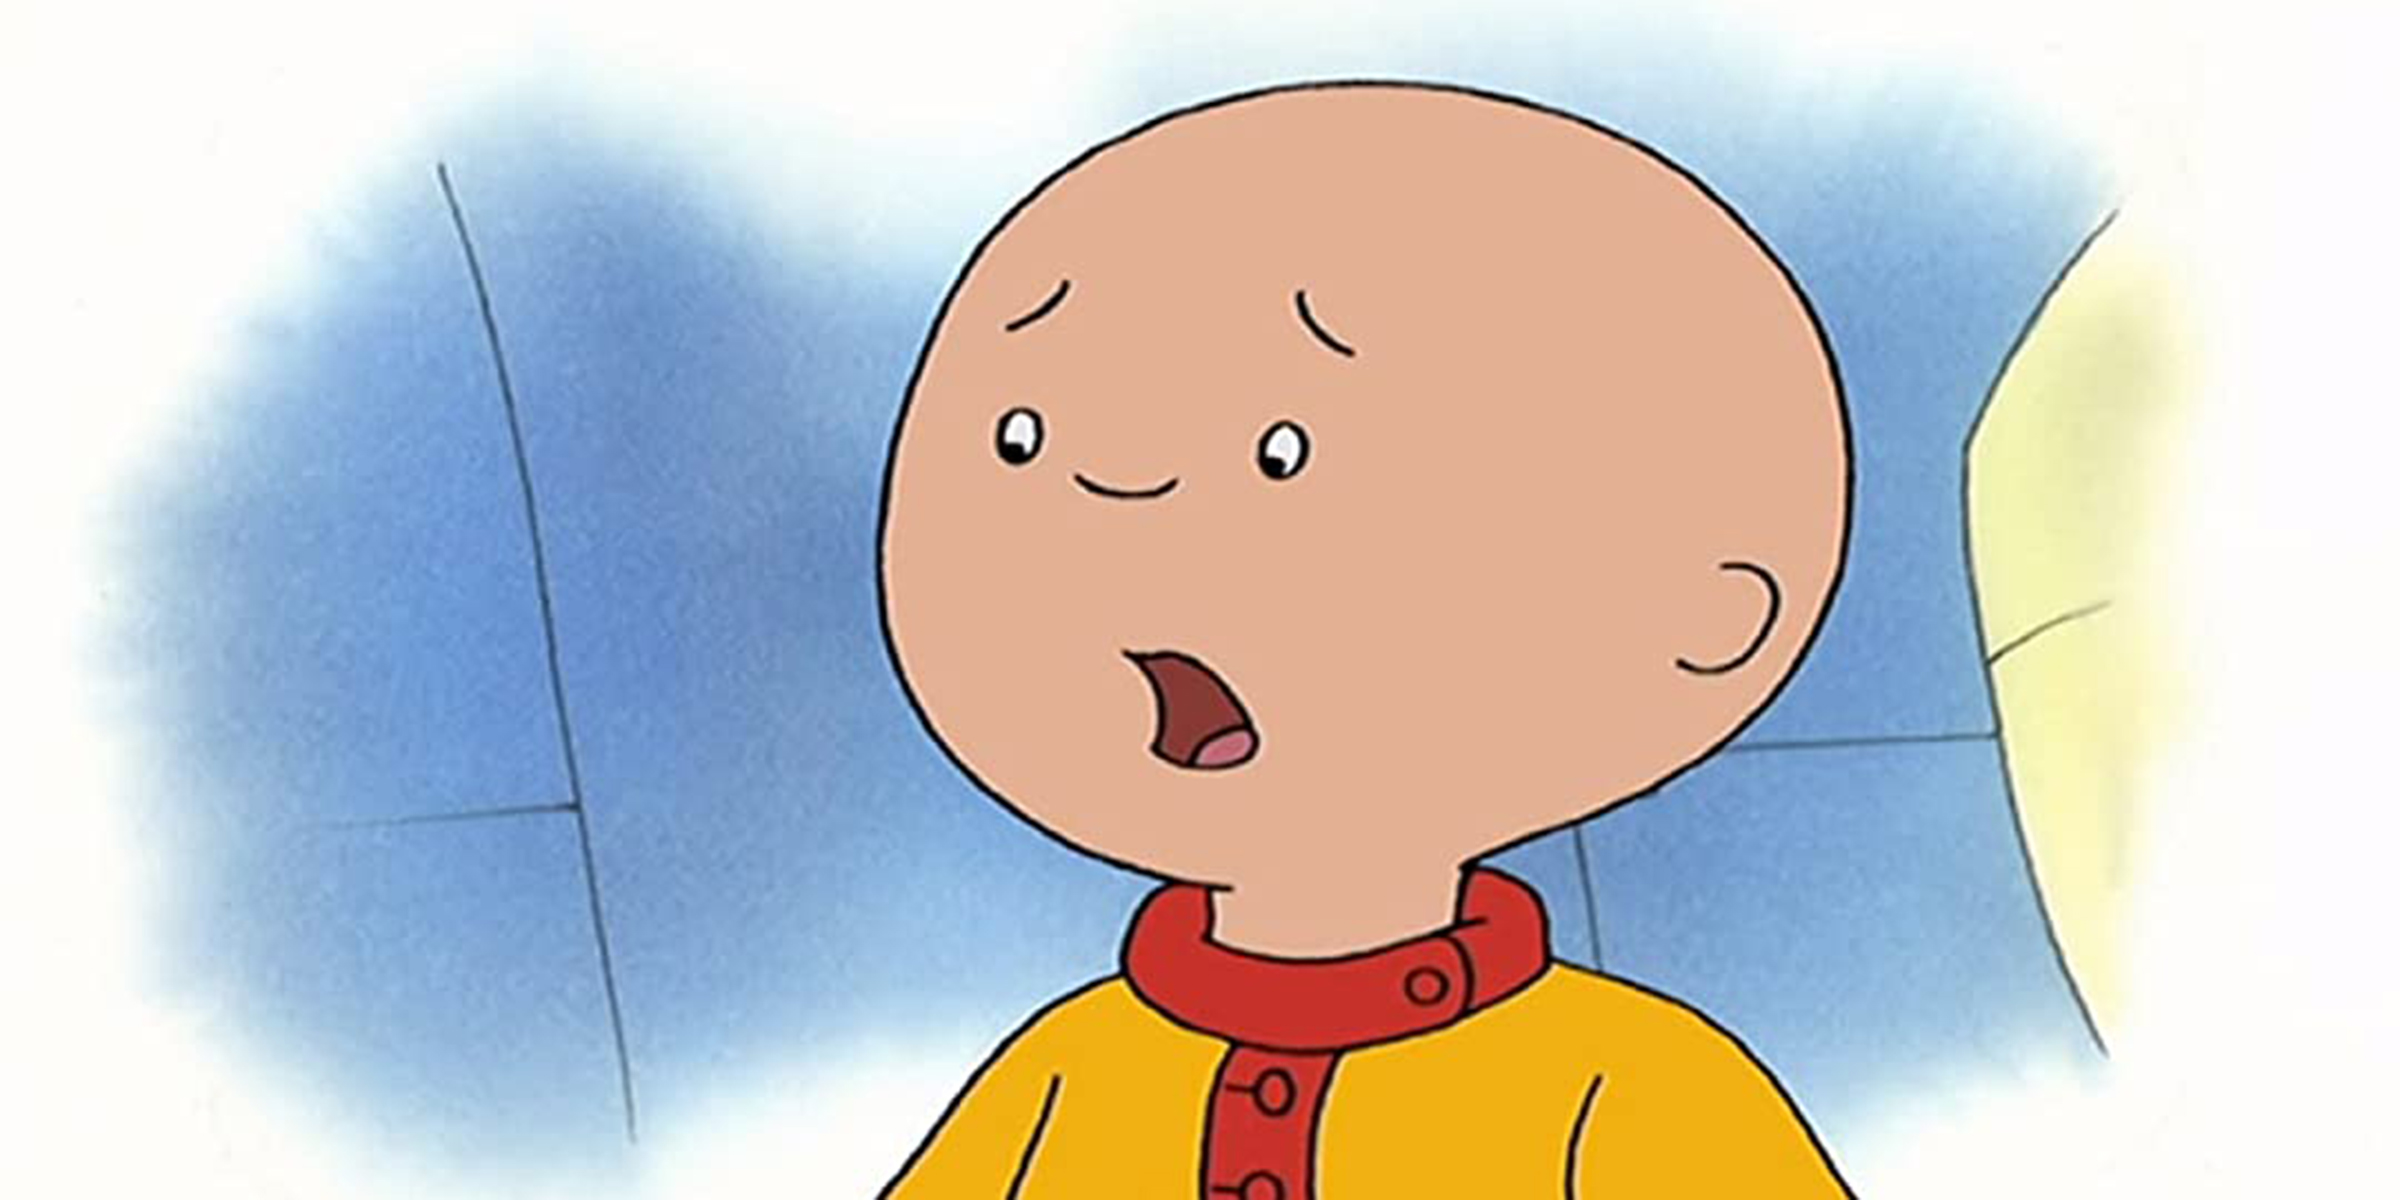 Caillou as a child